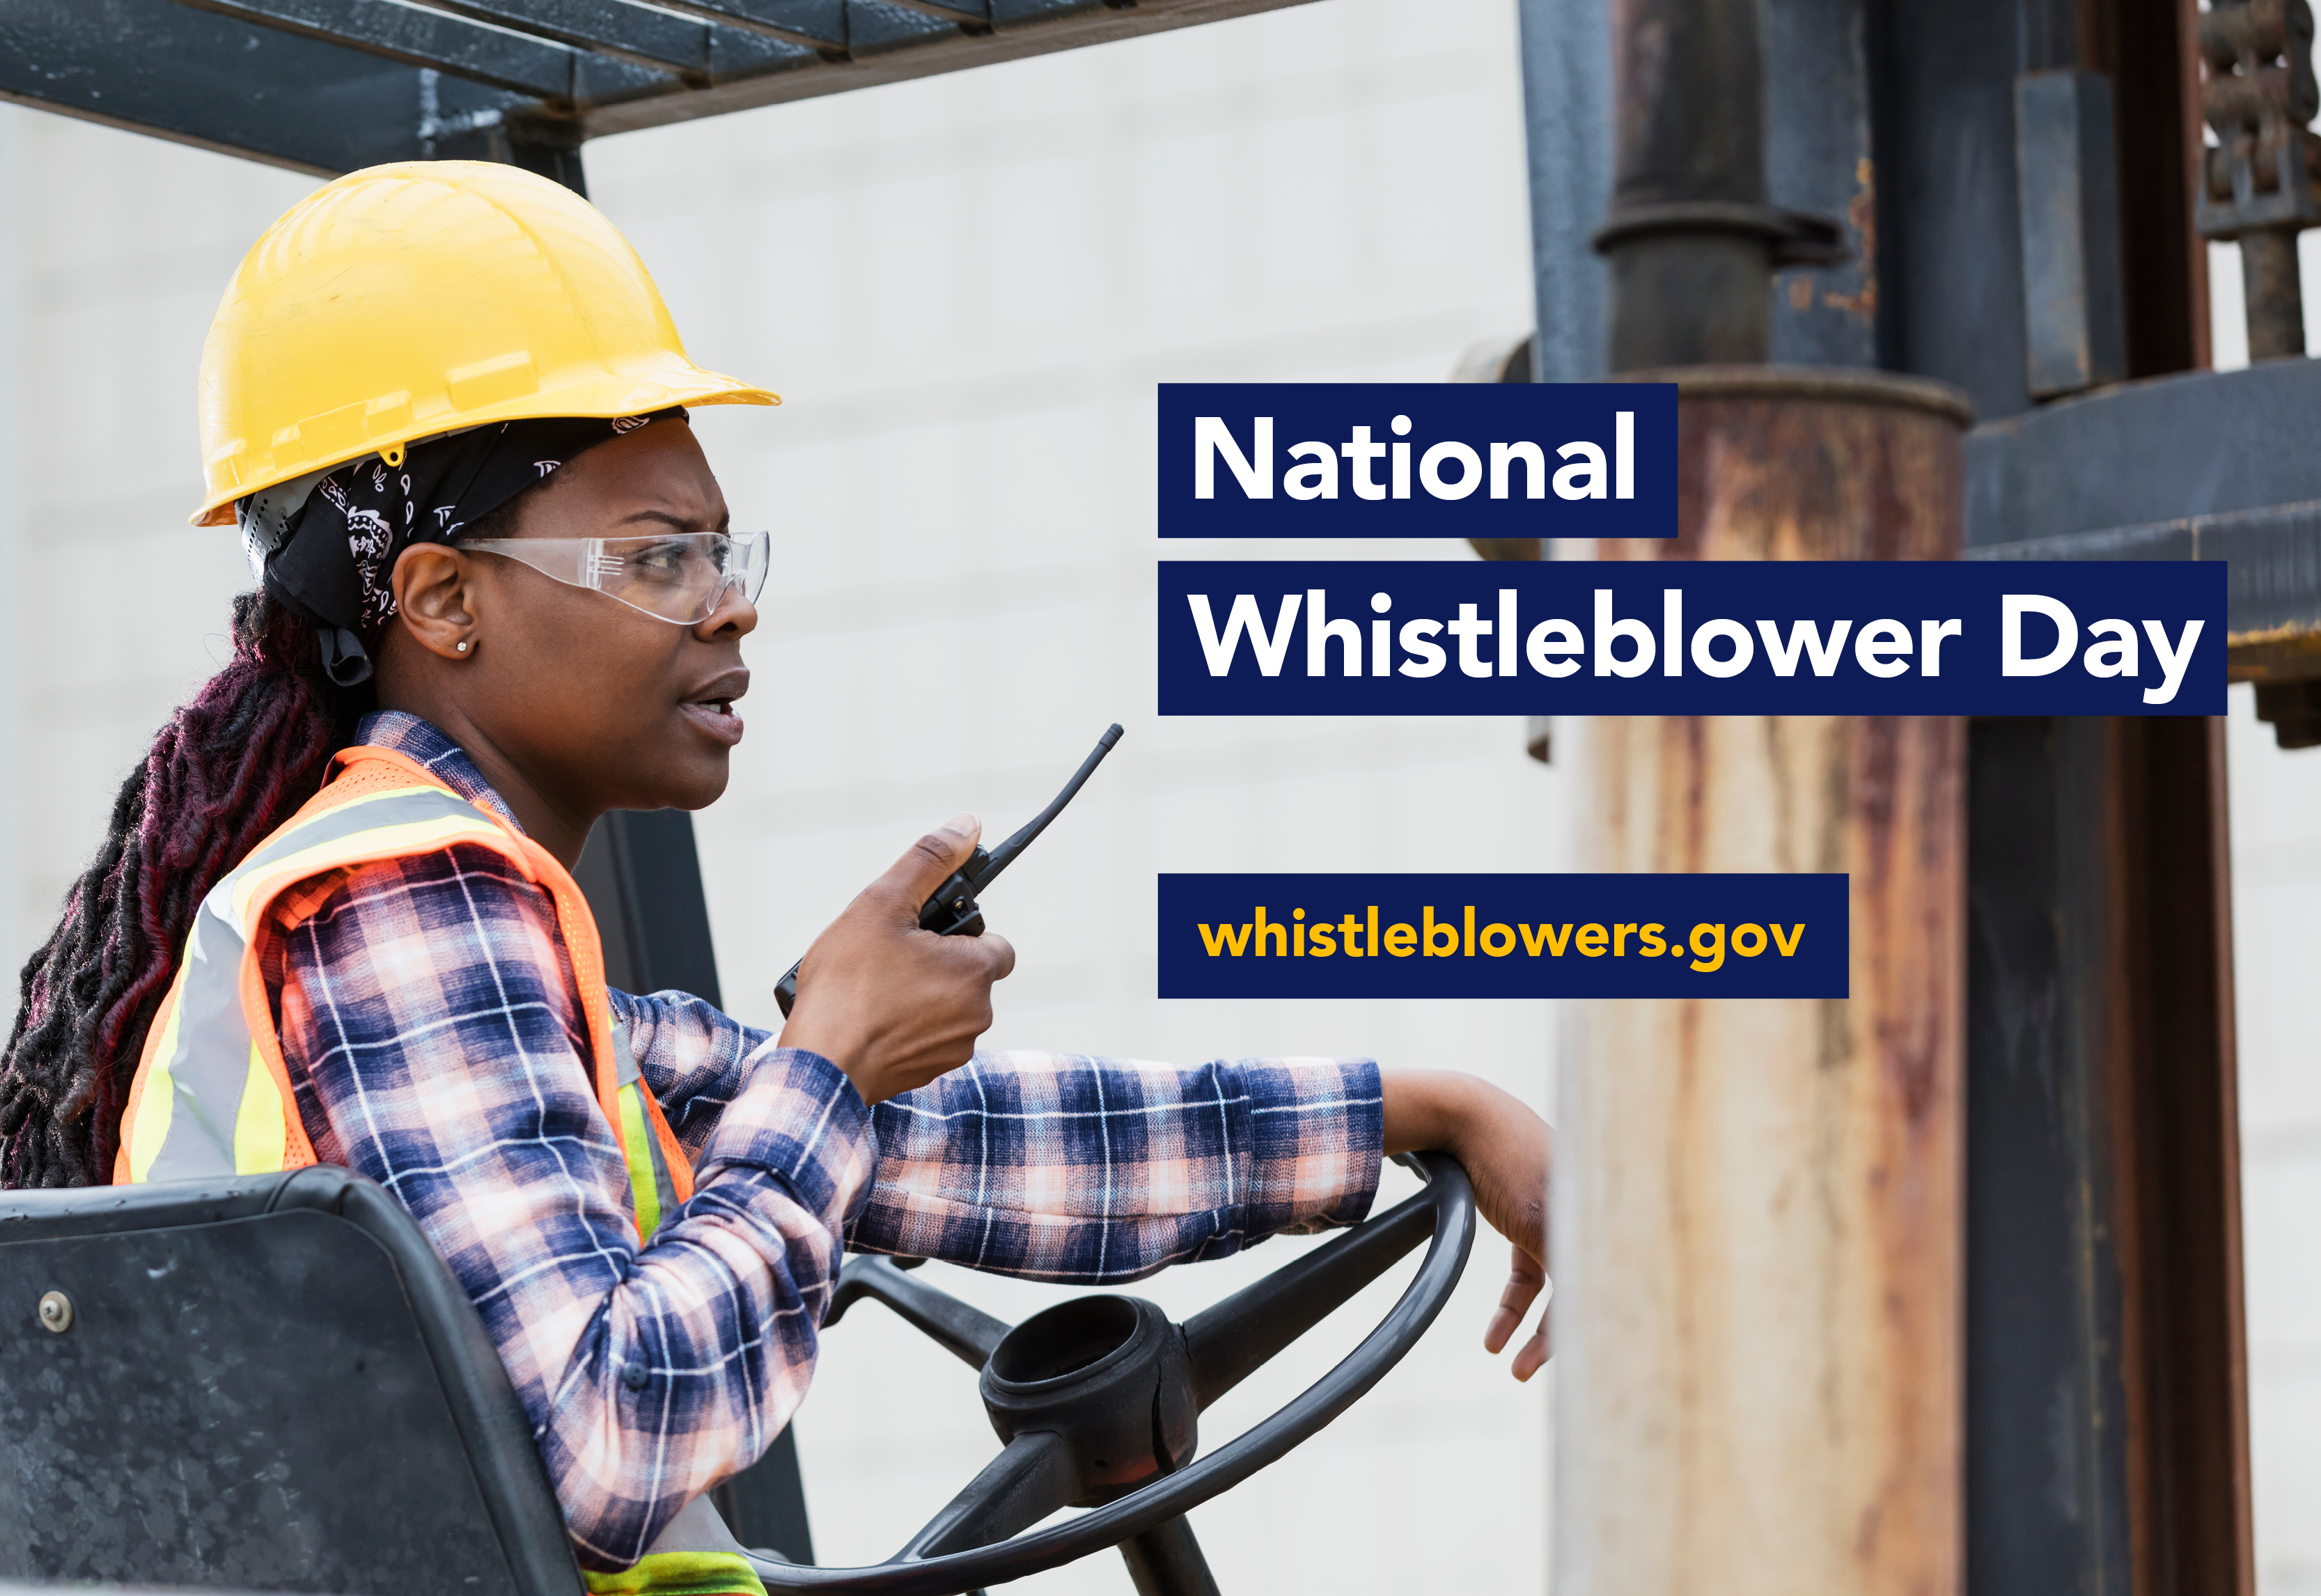 A female worker wearing a hard hat and safety goggles uses a walkie-talkie while sitting in a forklift or similar vehicle. The text reads "National Whistleblower Day, whistleblowers.gov